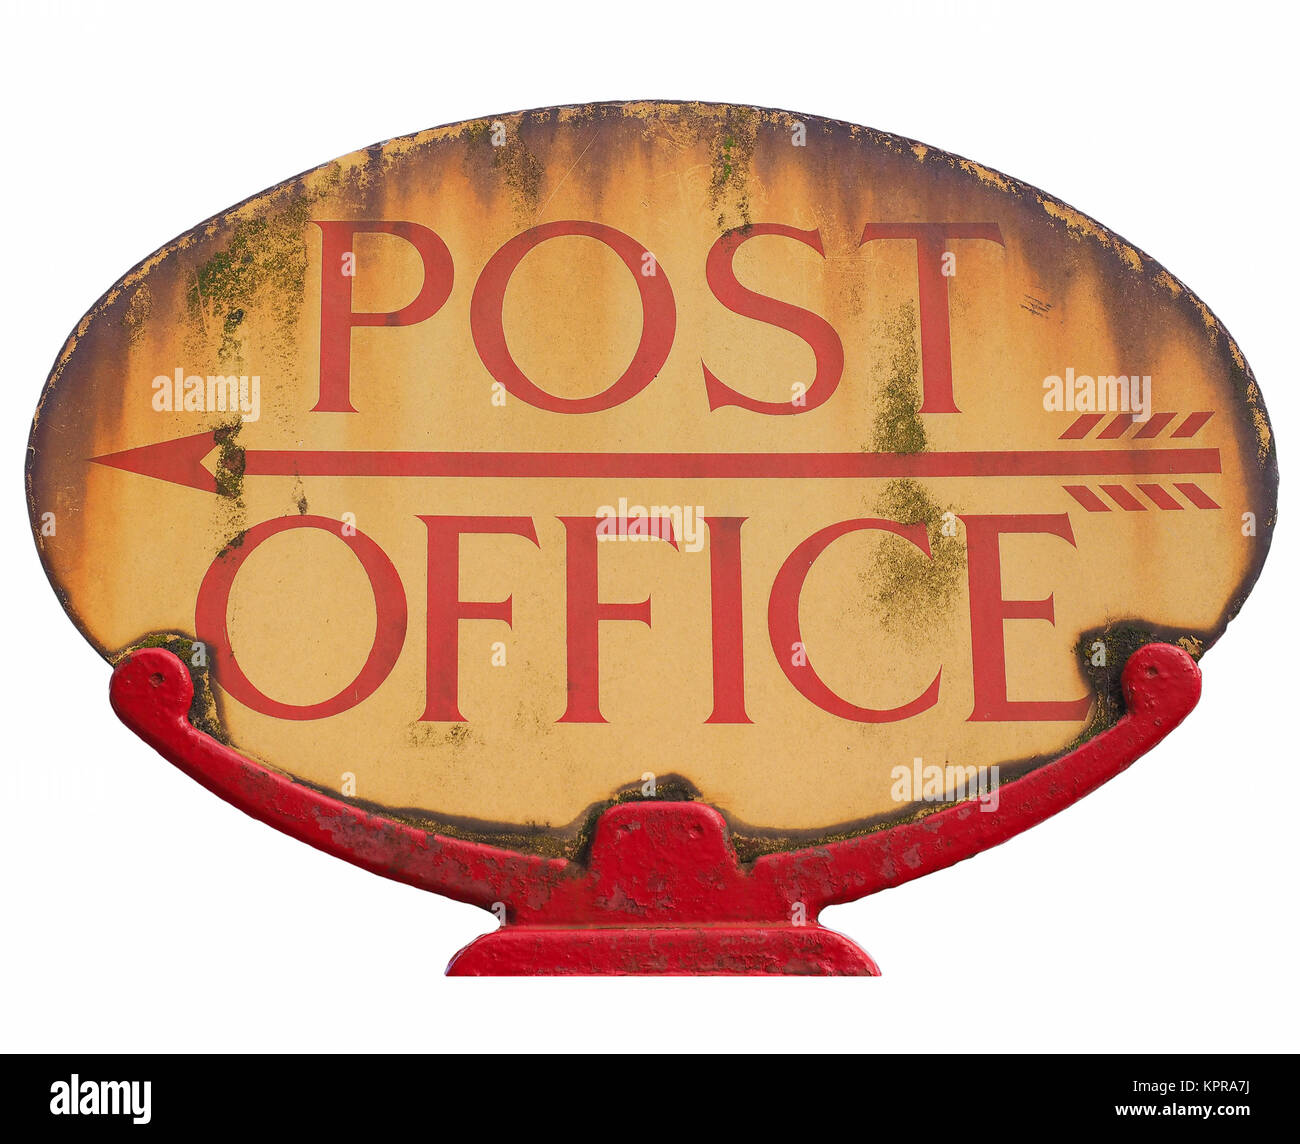 Post office sign Stock Photo